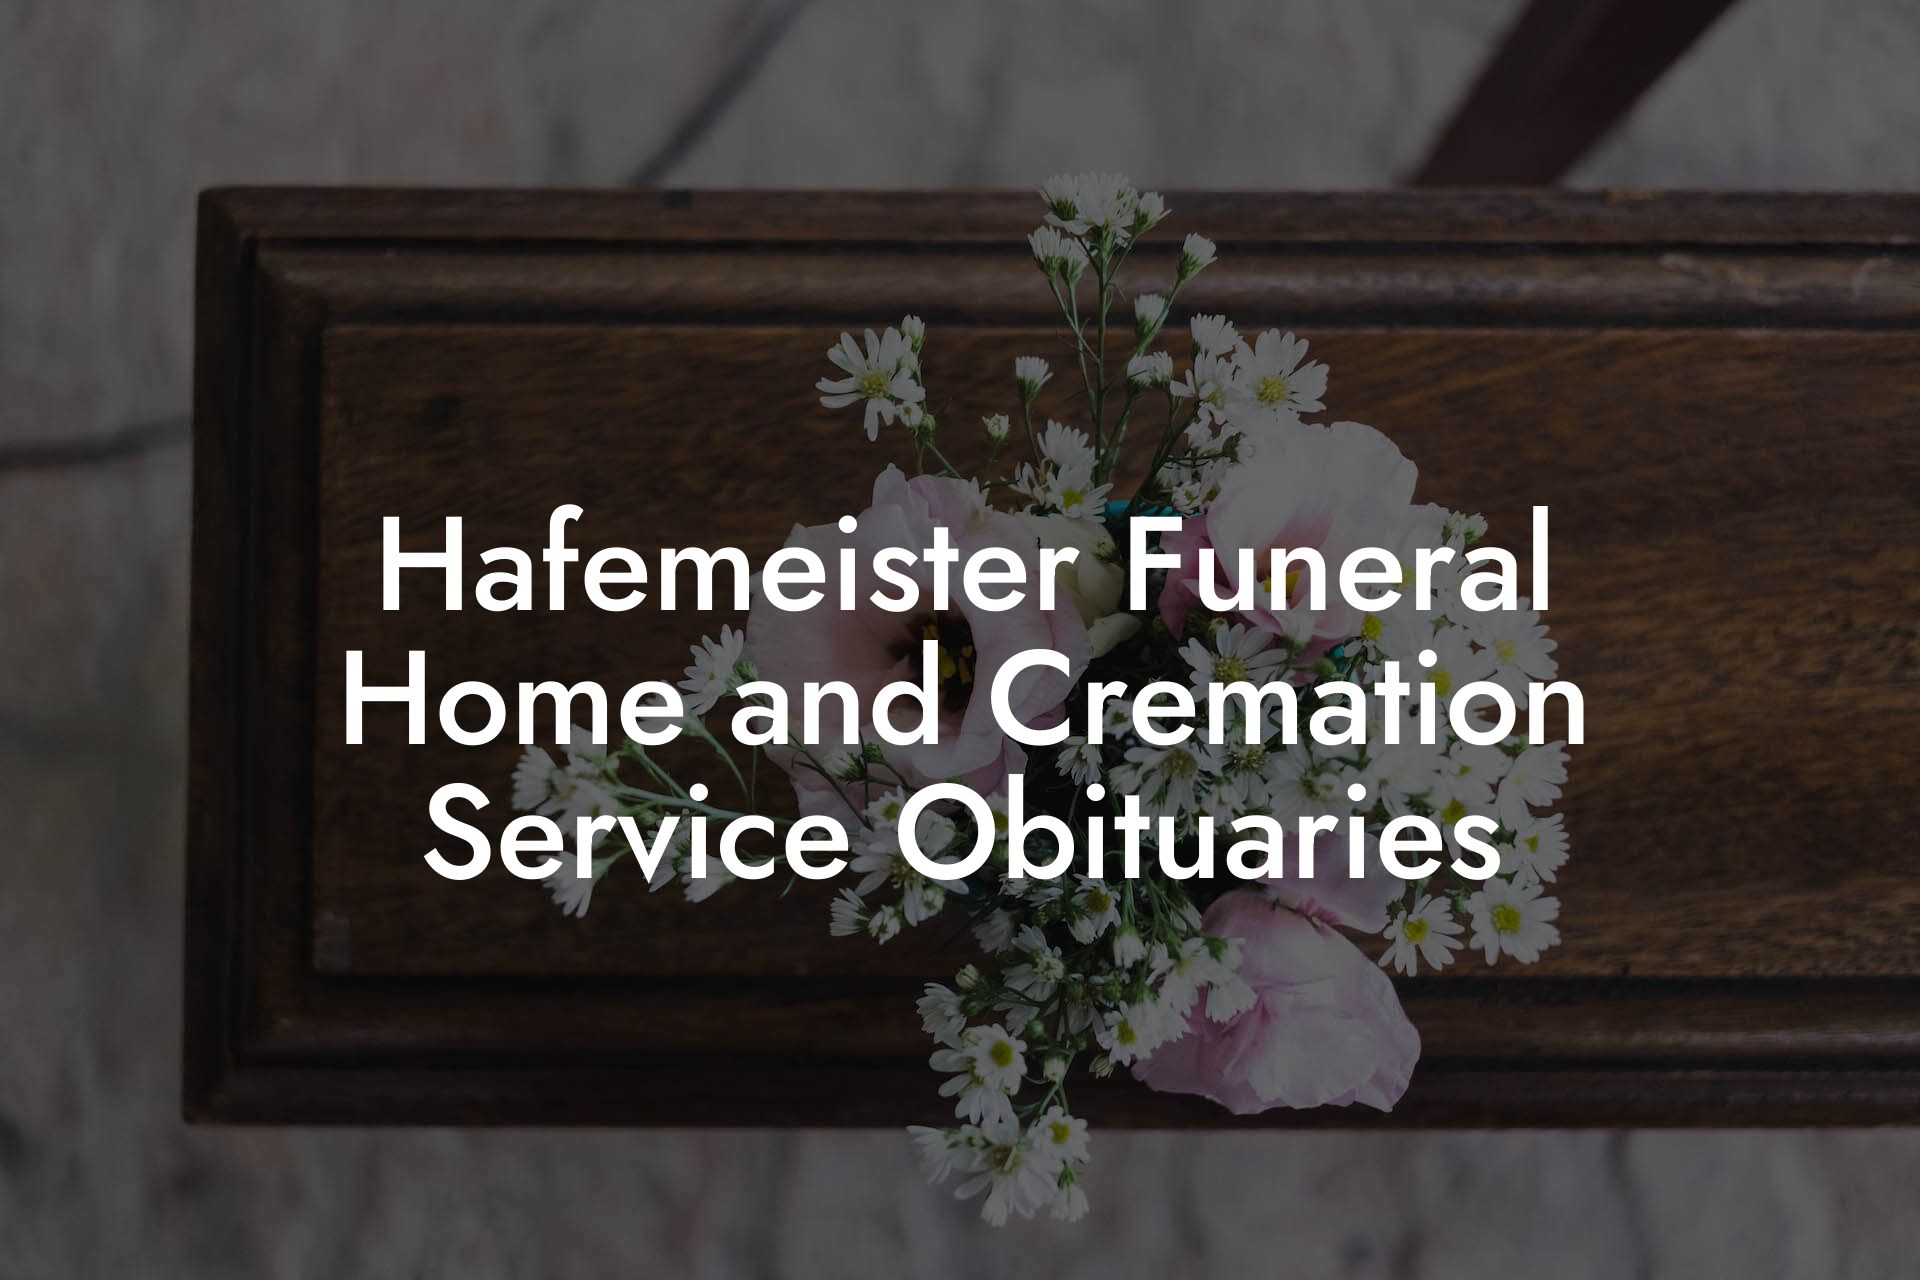 Hafemeister Funeral Home and Cremation Service Obituaries